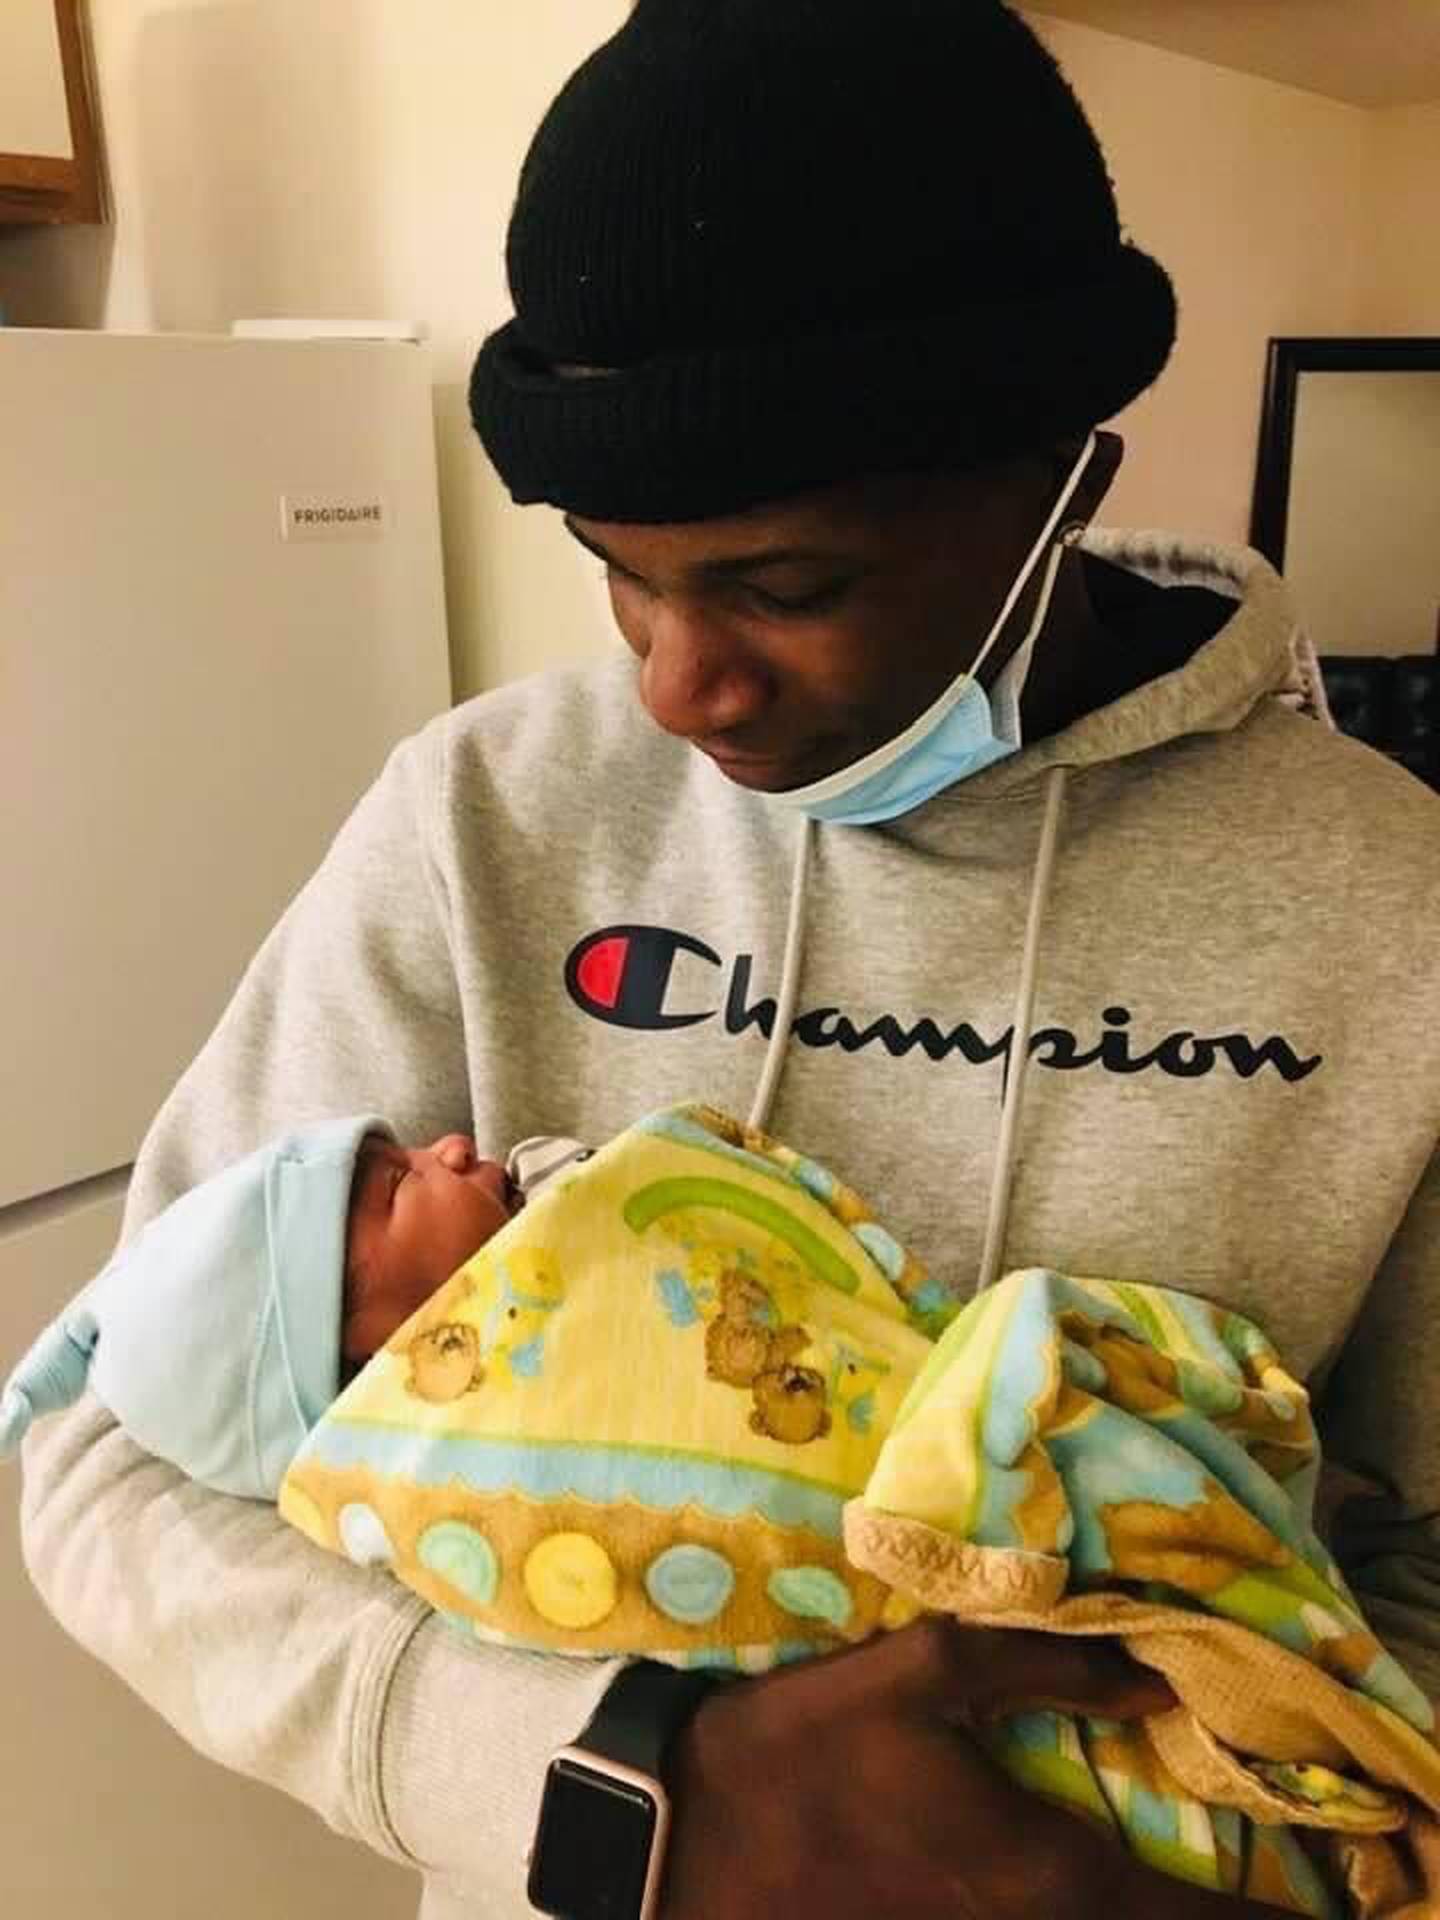 Marlon King Jr., a 2022 DeKalb High School graduate, holds his newborn daughter, Ari, in fall 2020. King was fatally shot May 11, 2023 in DeKalb. Two men, Jayden C. Hernandez and Carreon S. Scott, also of DeKalb, are charged with first-degree murder in his death.